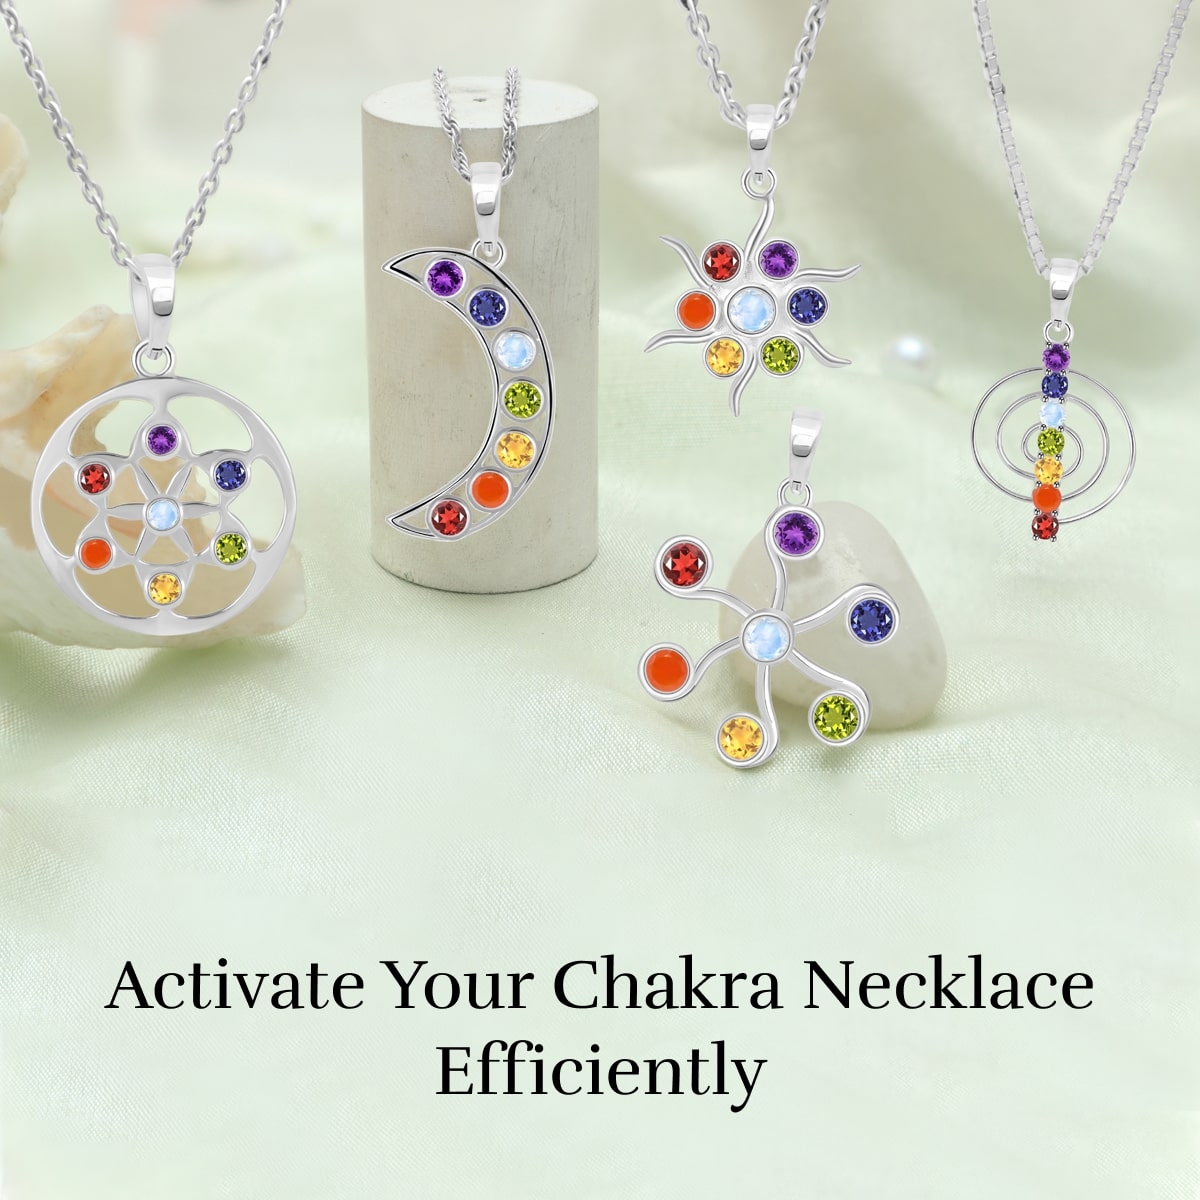 How to Activate a Chakra Necklace